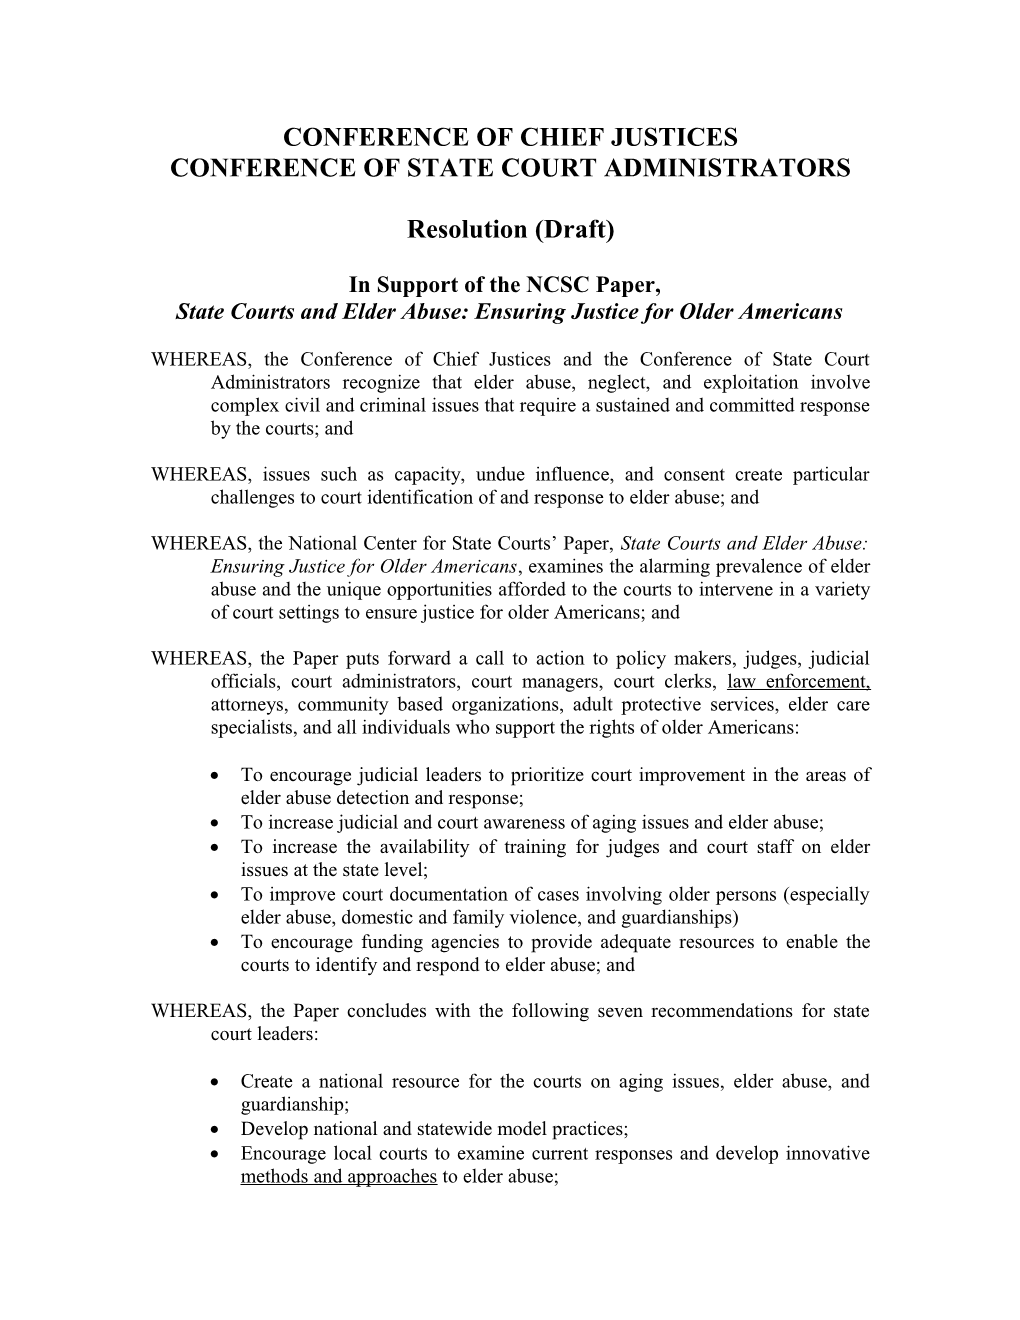 Conference of State Court Administrators